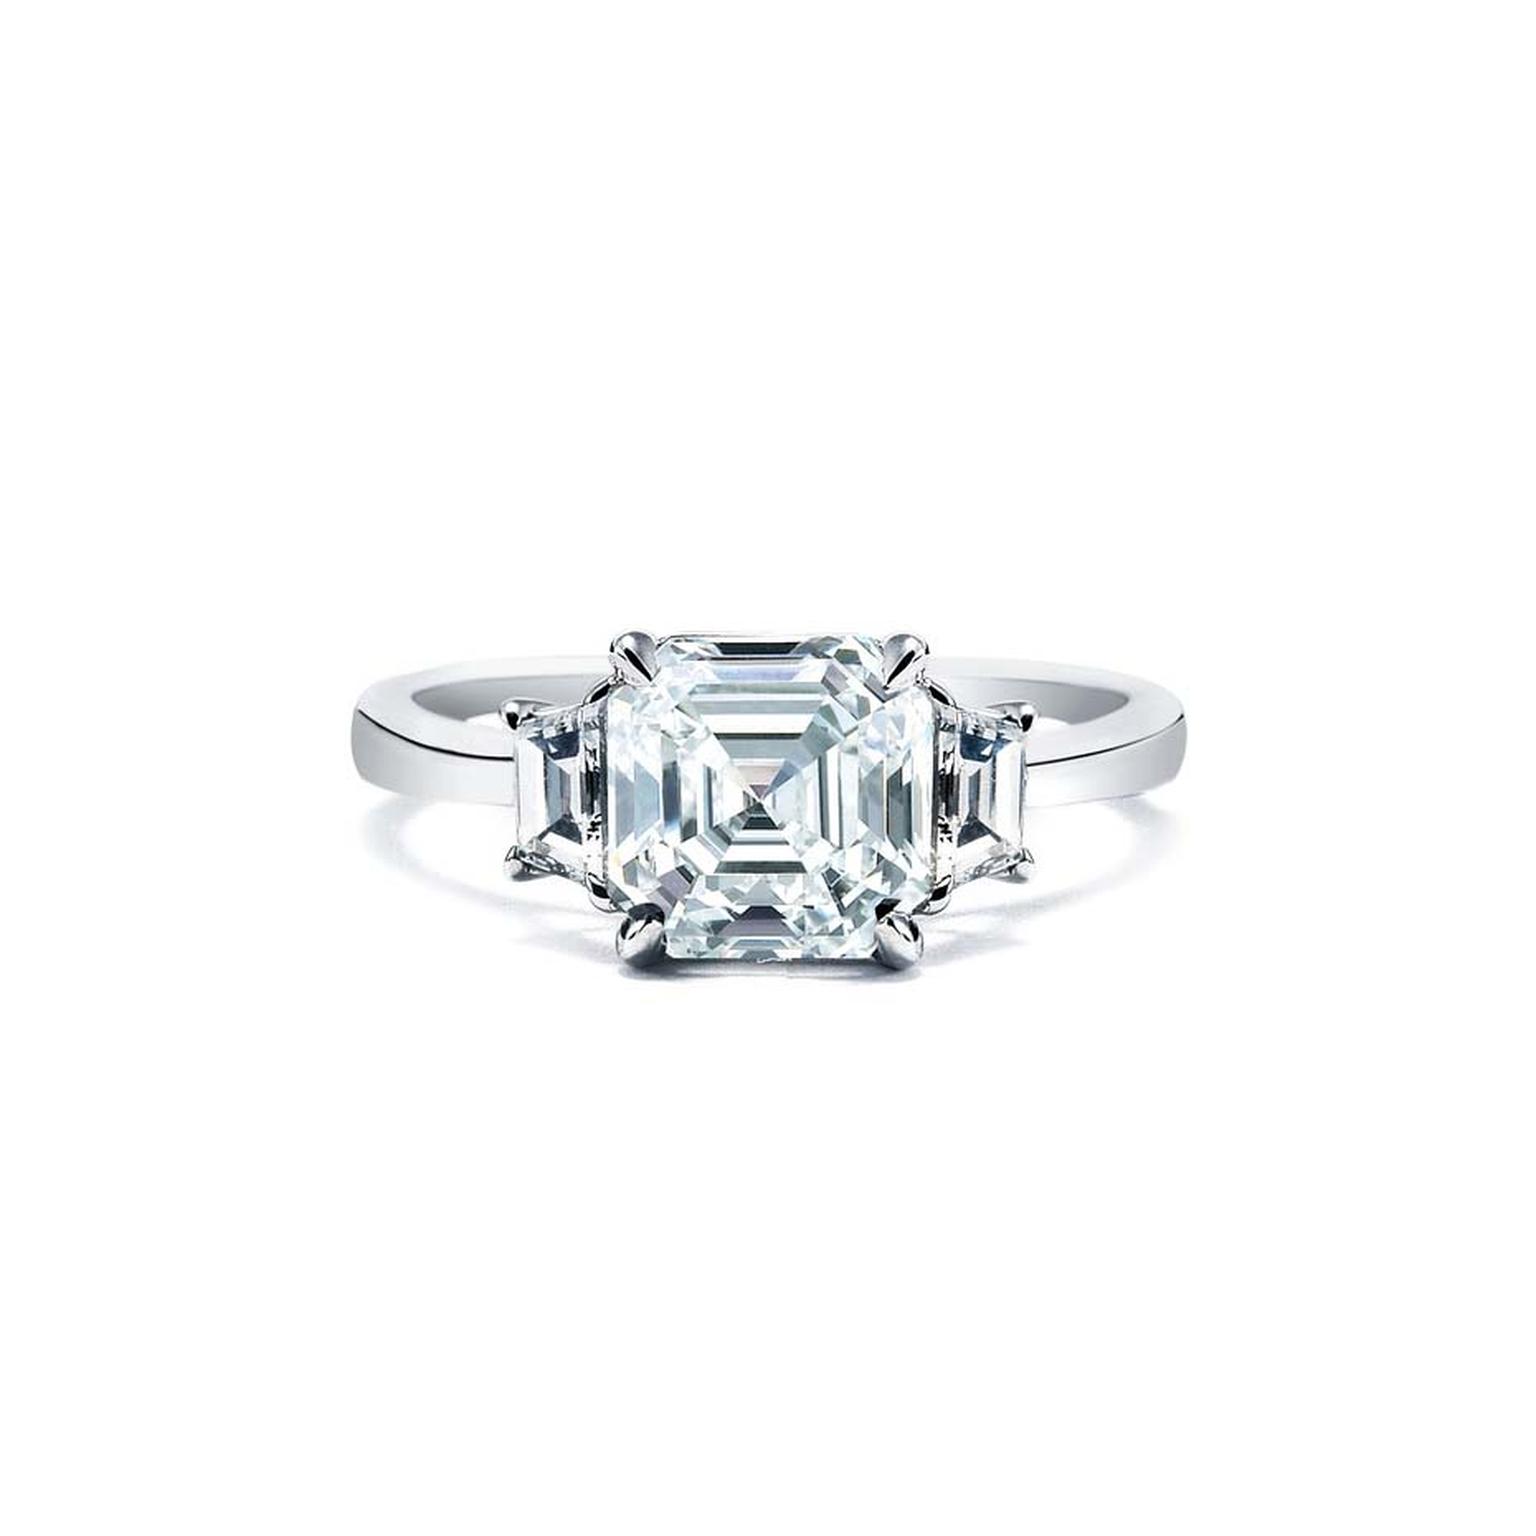 Royal Asscher cut diamond engagement ring in white gold, with accompanying shoulder set diamonds. Also available in platinum and yellow gold.